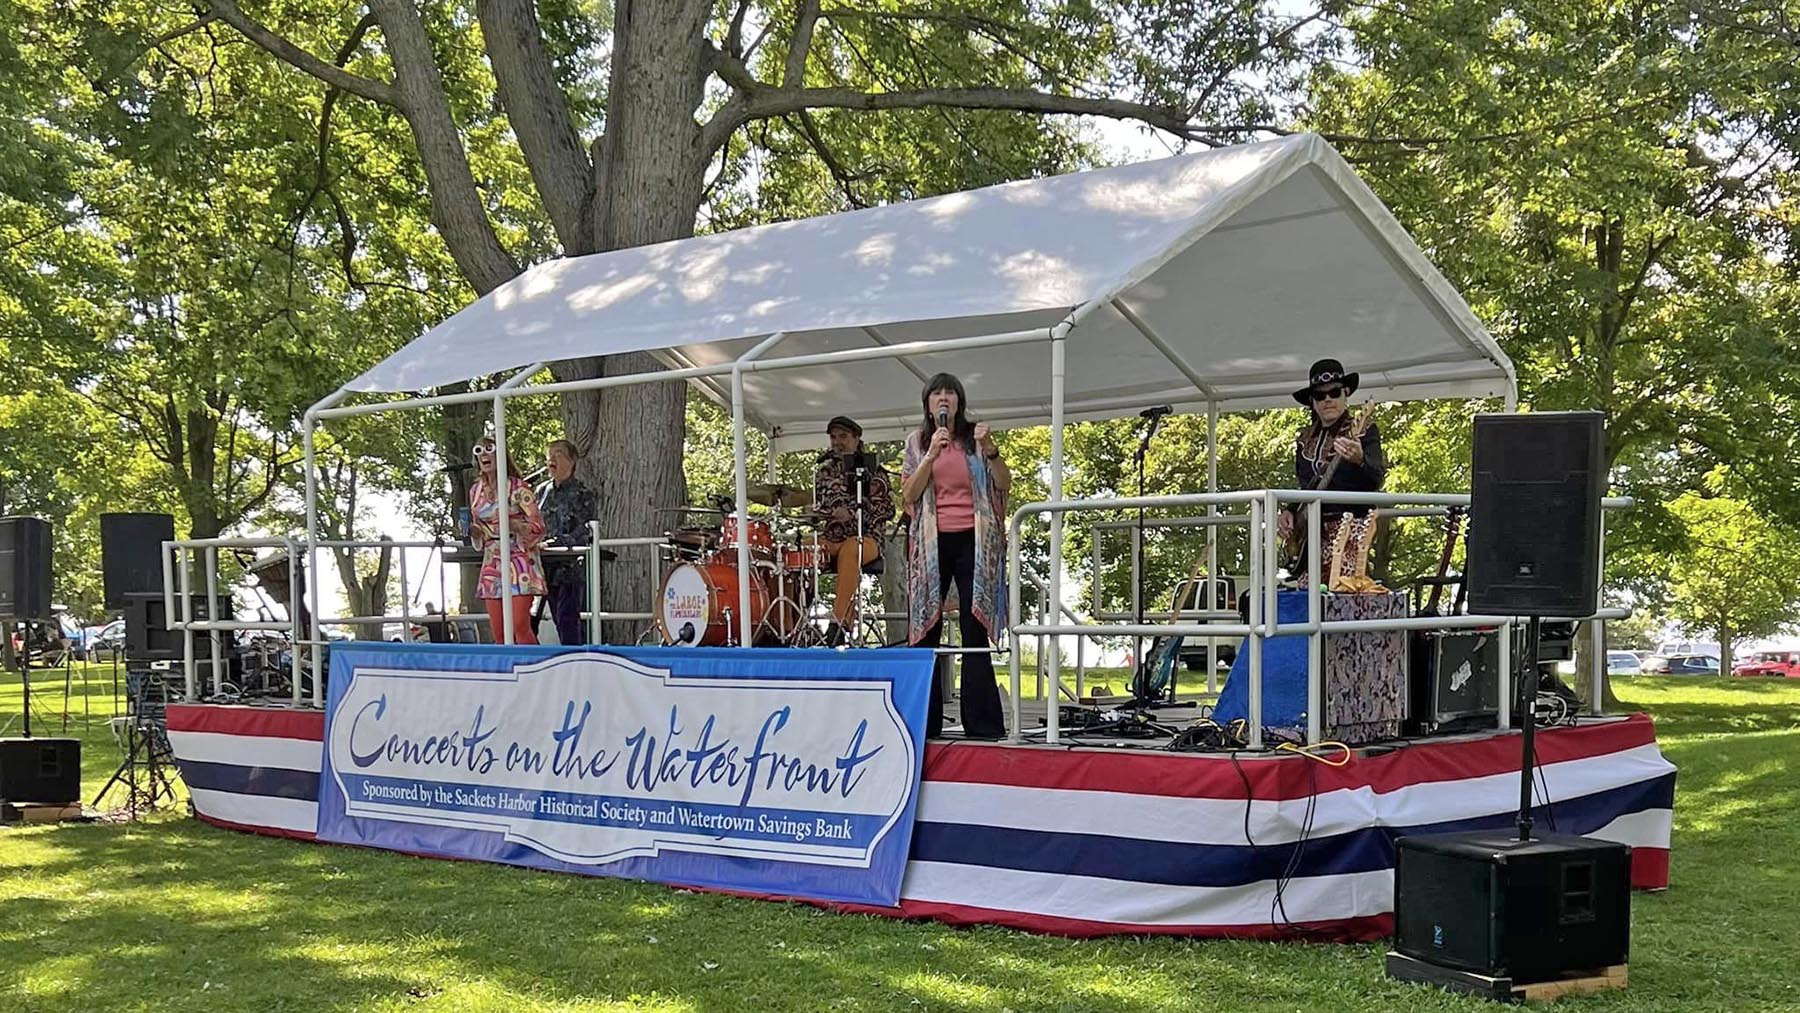 The Large Flowerheads band performing during the 2023 Concerts on the Waterfront series at the Sackets Harbor Battlefield